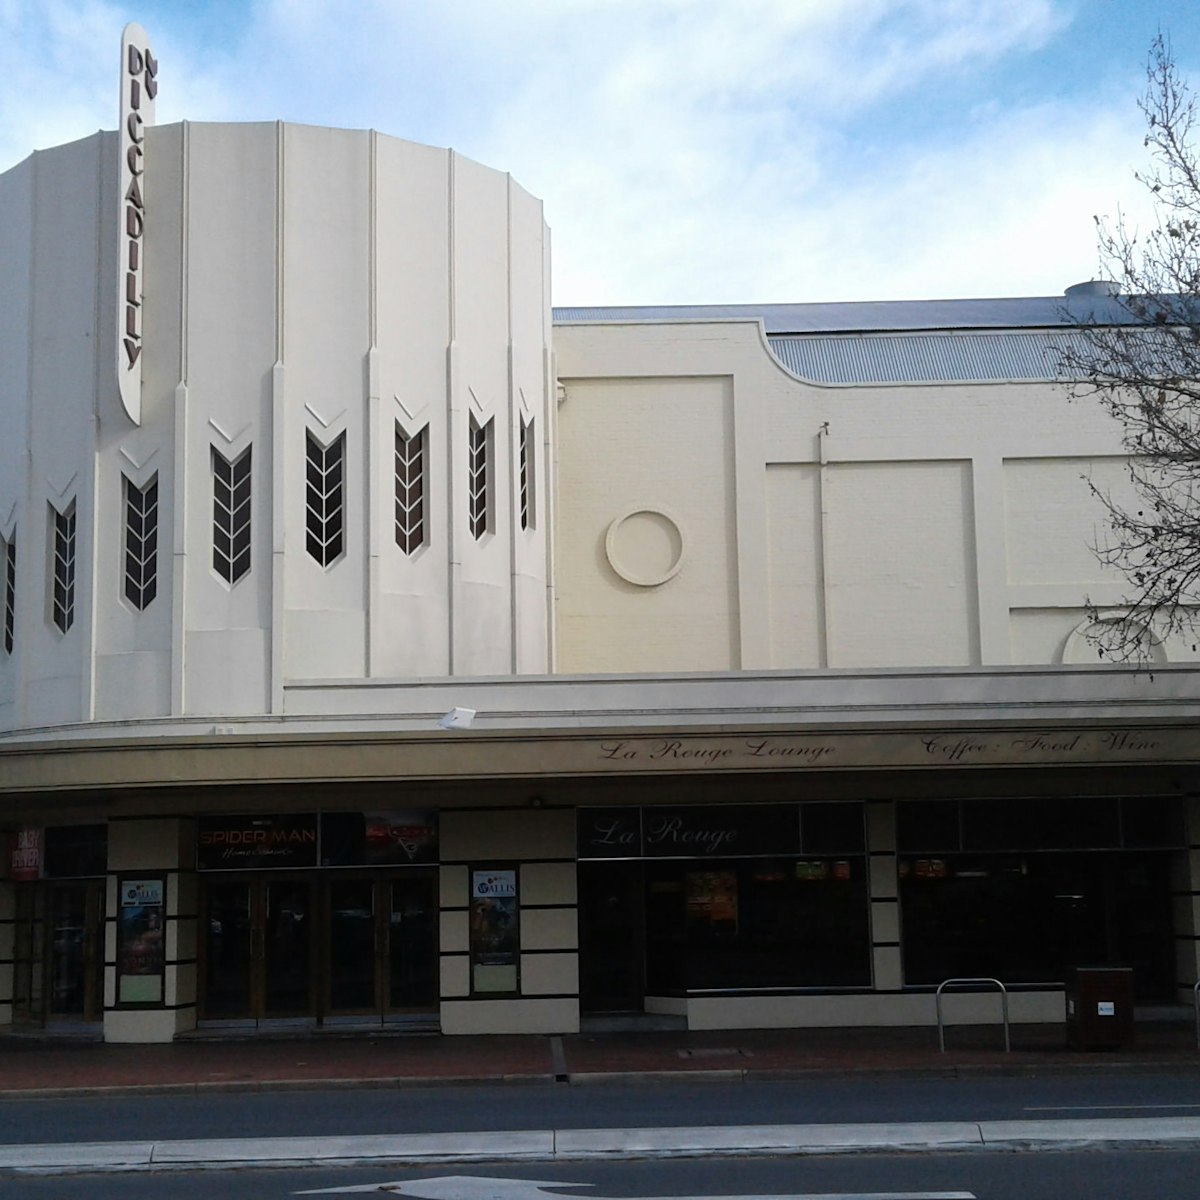 Piccadilly Cinema